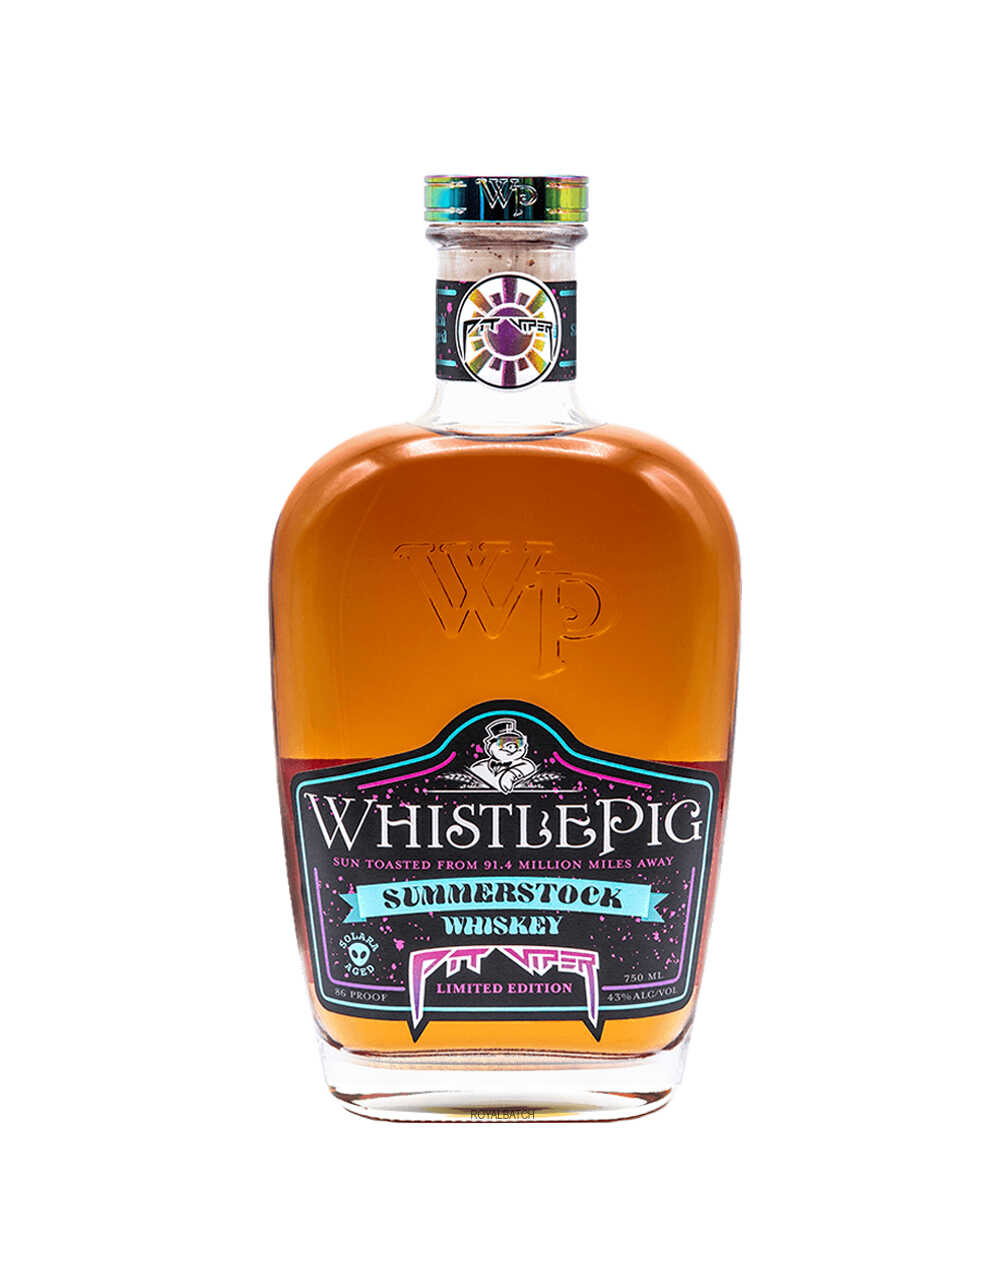 WhistlePig Summerstock Whiskey